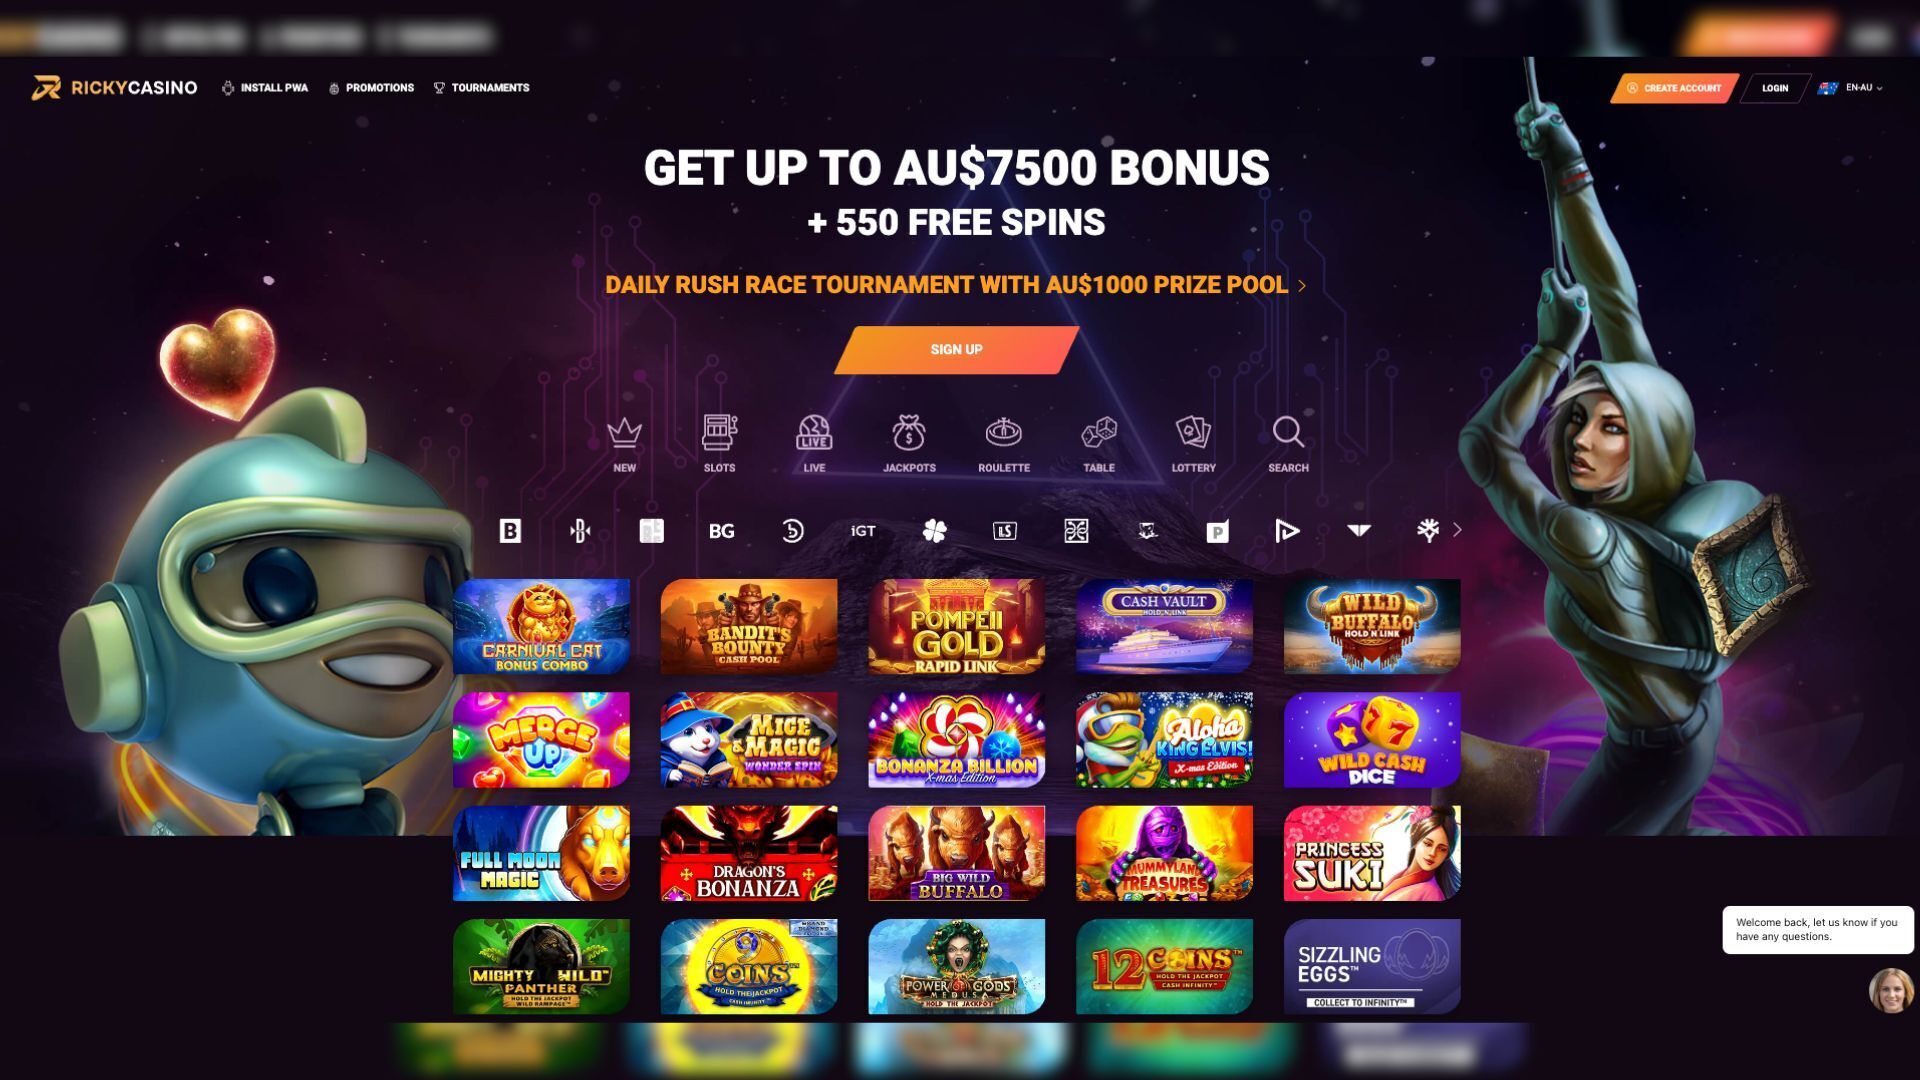 This is a screenshot of the Ricky Casino Home Page in Australia